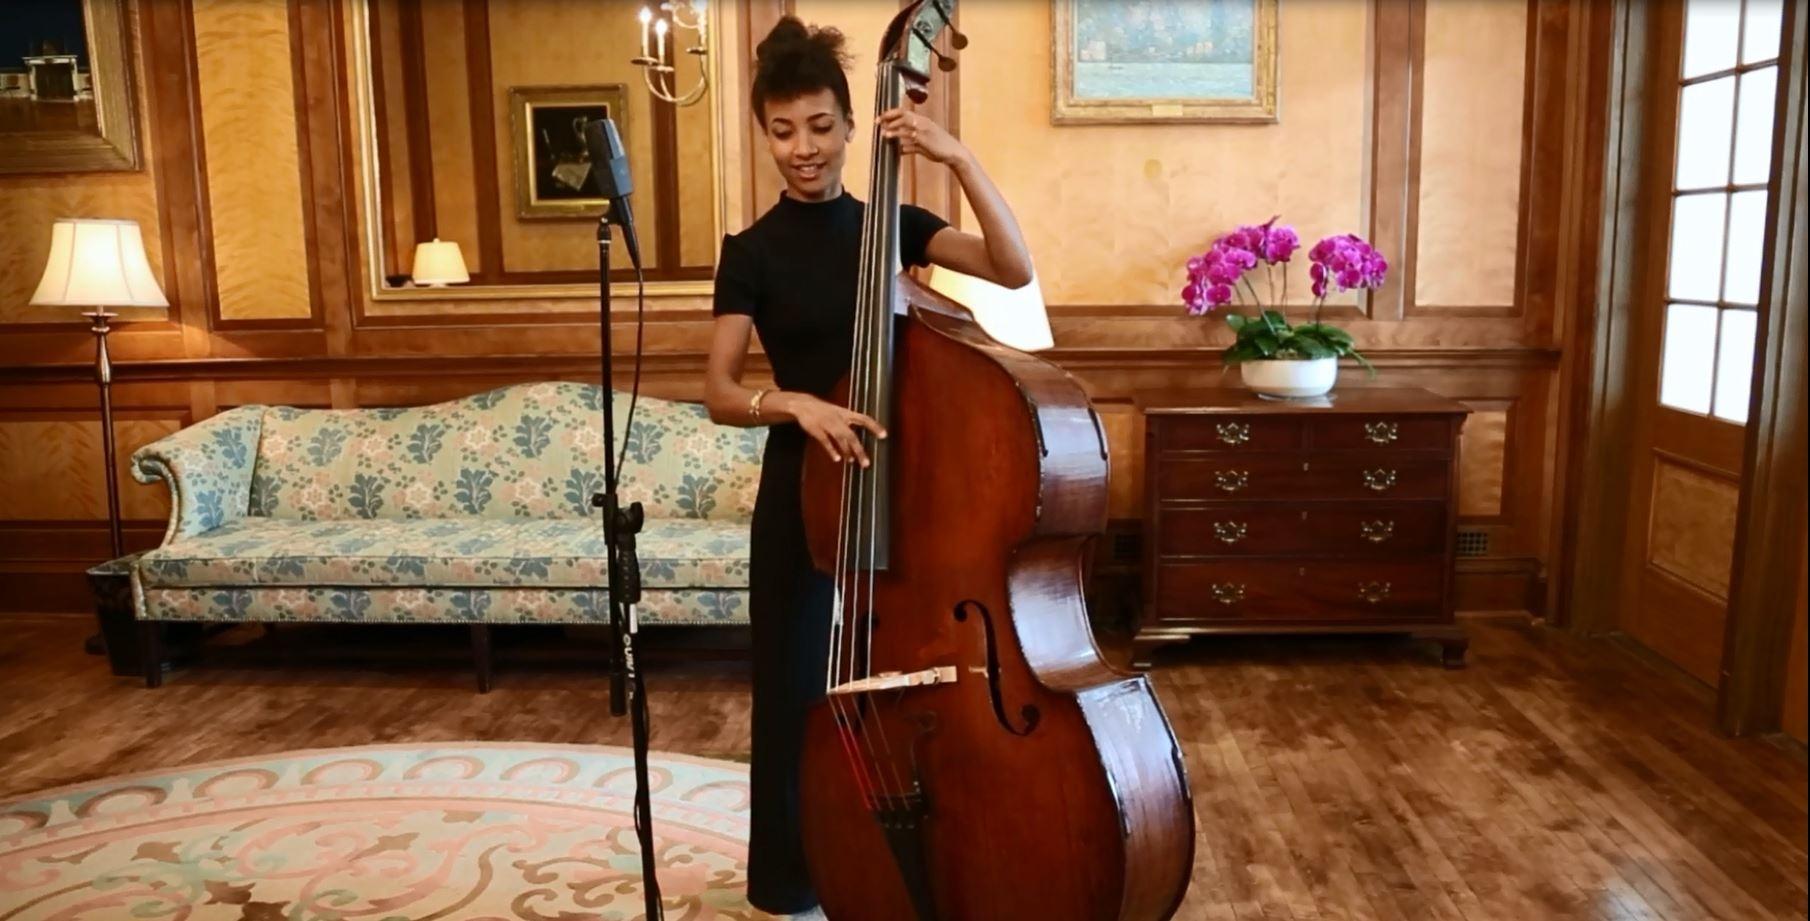 Watch Full Episodes Online of In Performance at The White House on PBS | Esperanza Spalding: Behind the Scenes Performance